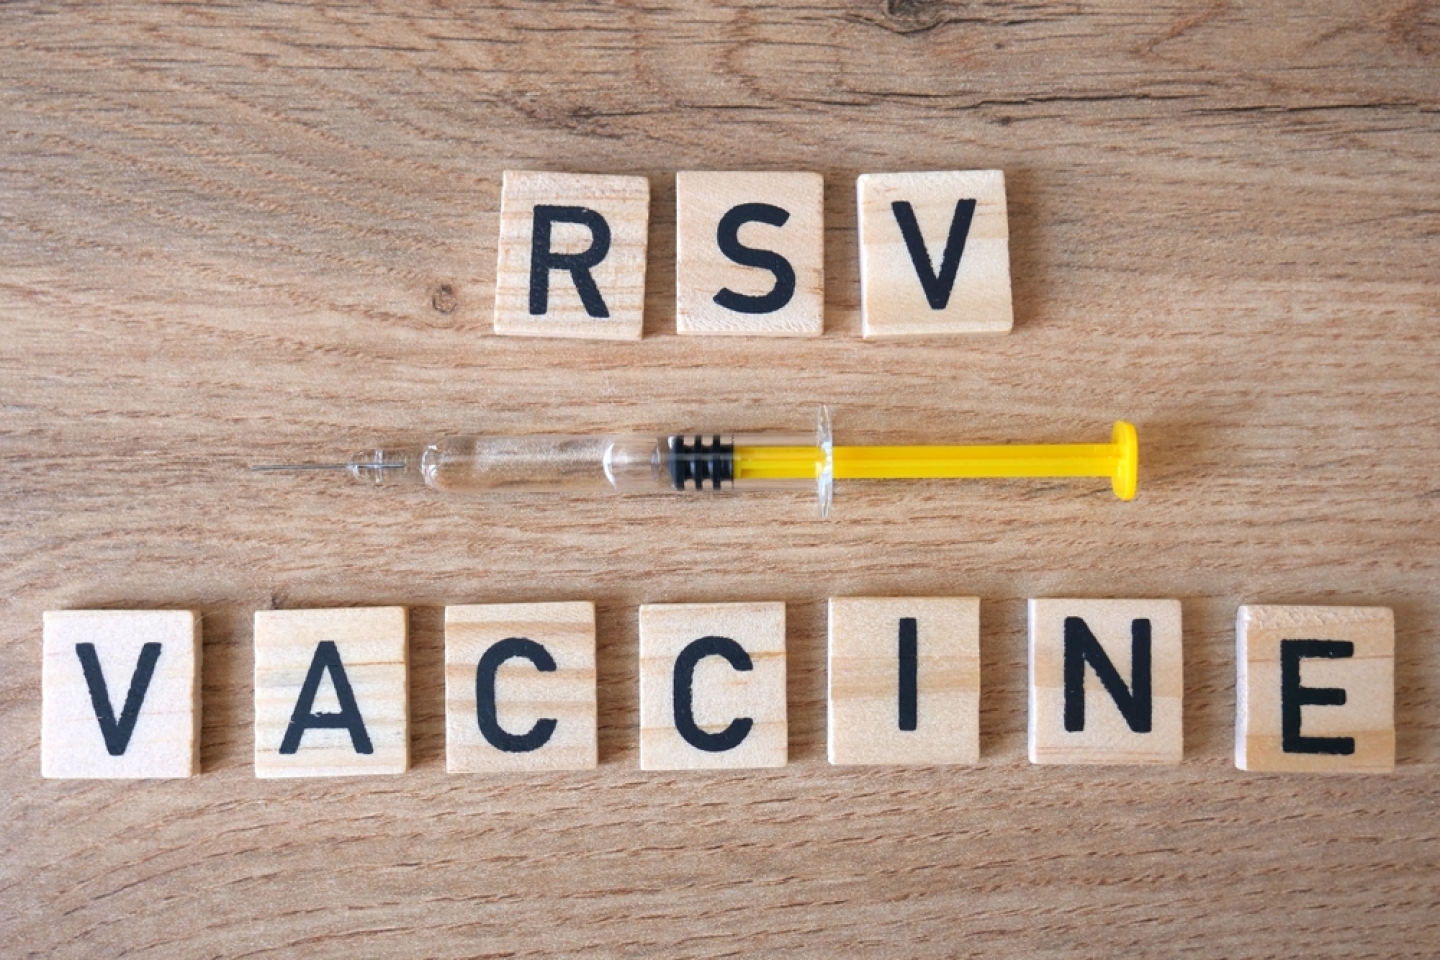 Respiratory Syncytial Virus (RSV) Vaccine concept